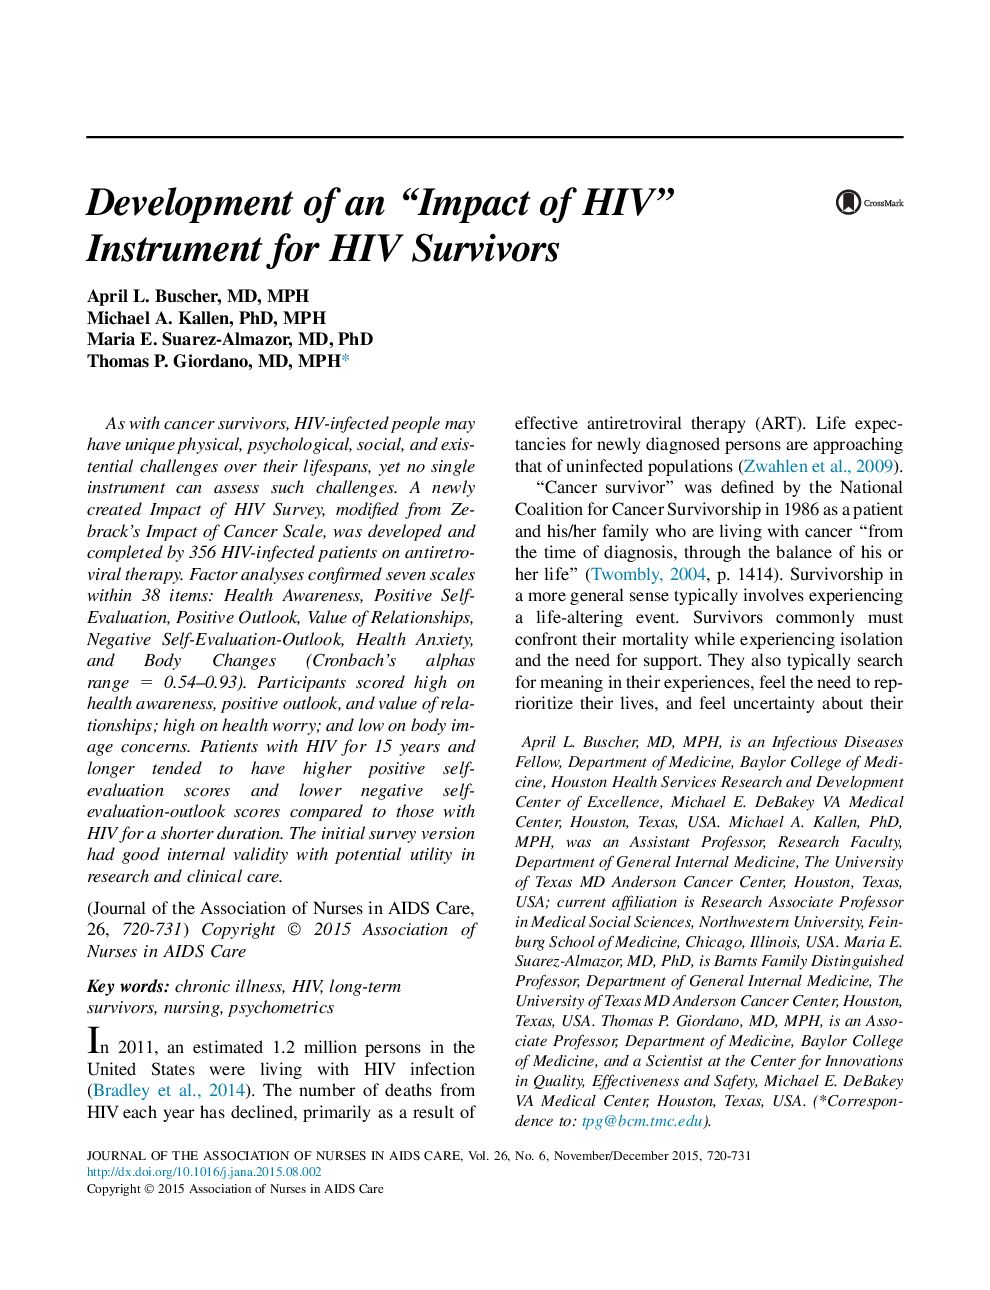 Development of an “Impact of HIV” Instrument for HIV Survivors